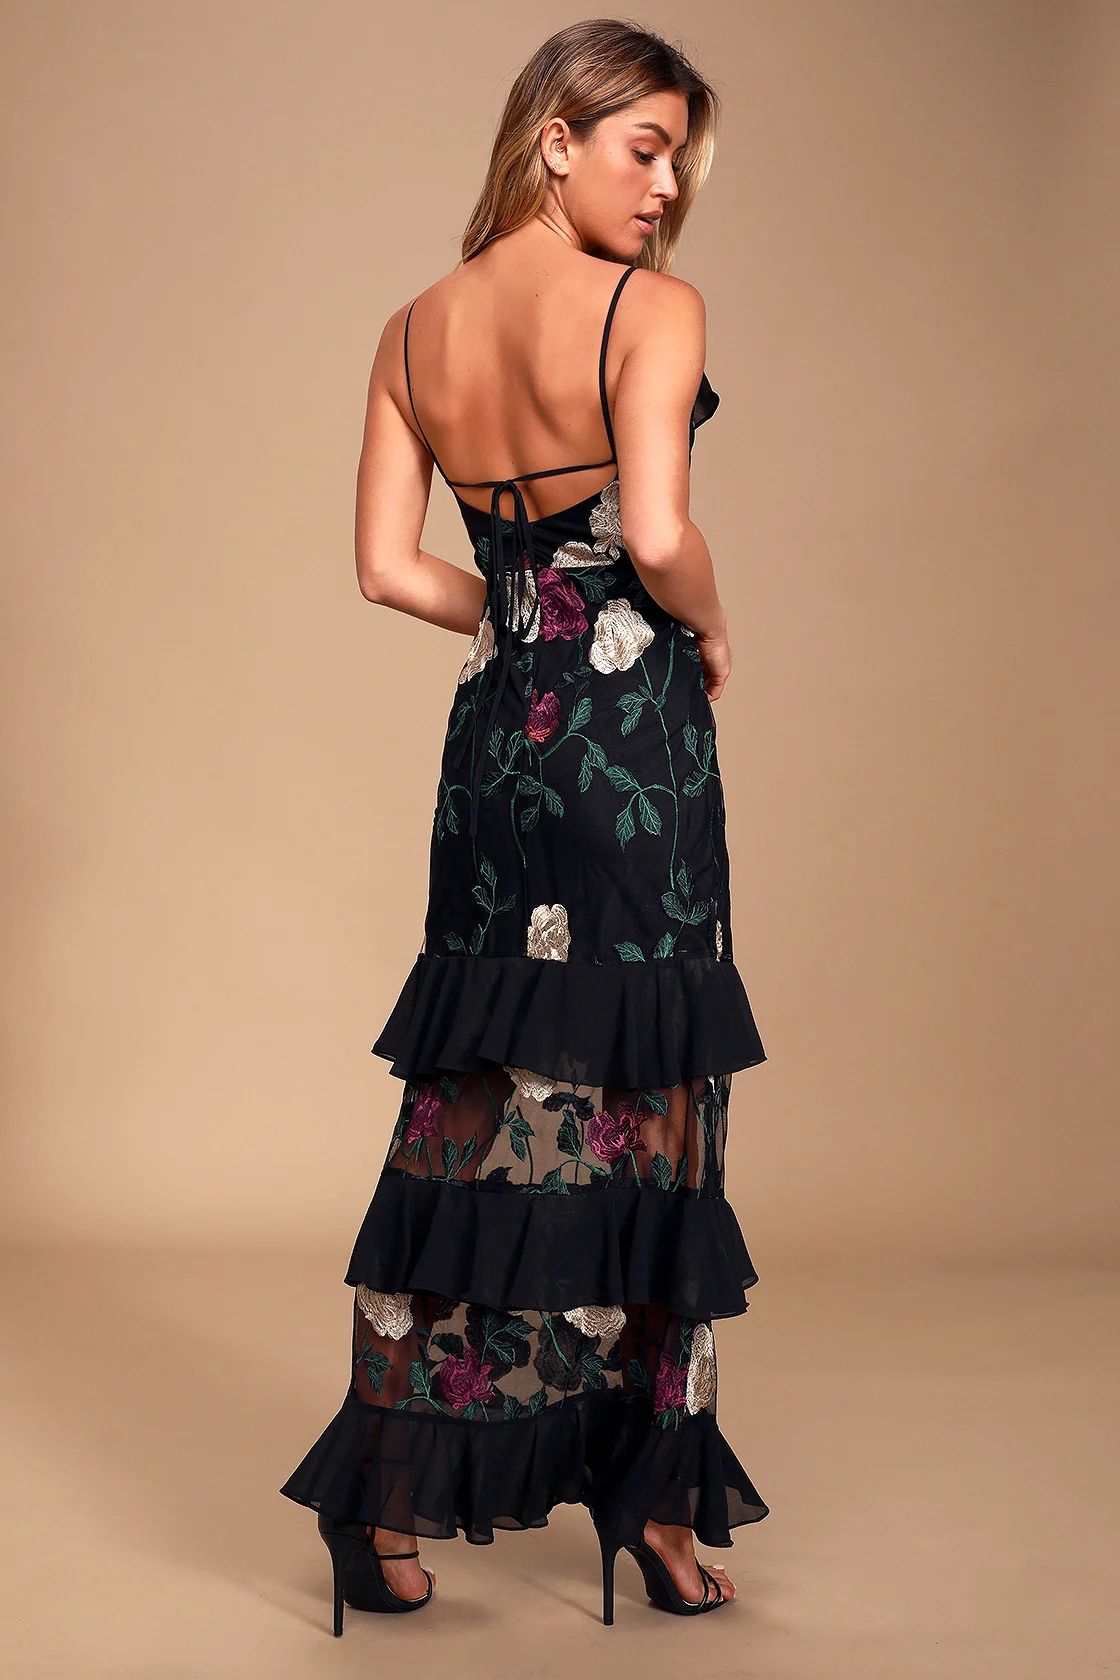 True to Heart Black Floral Embroidered Maxi Dress | Lulus